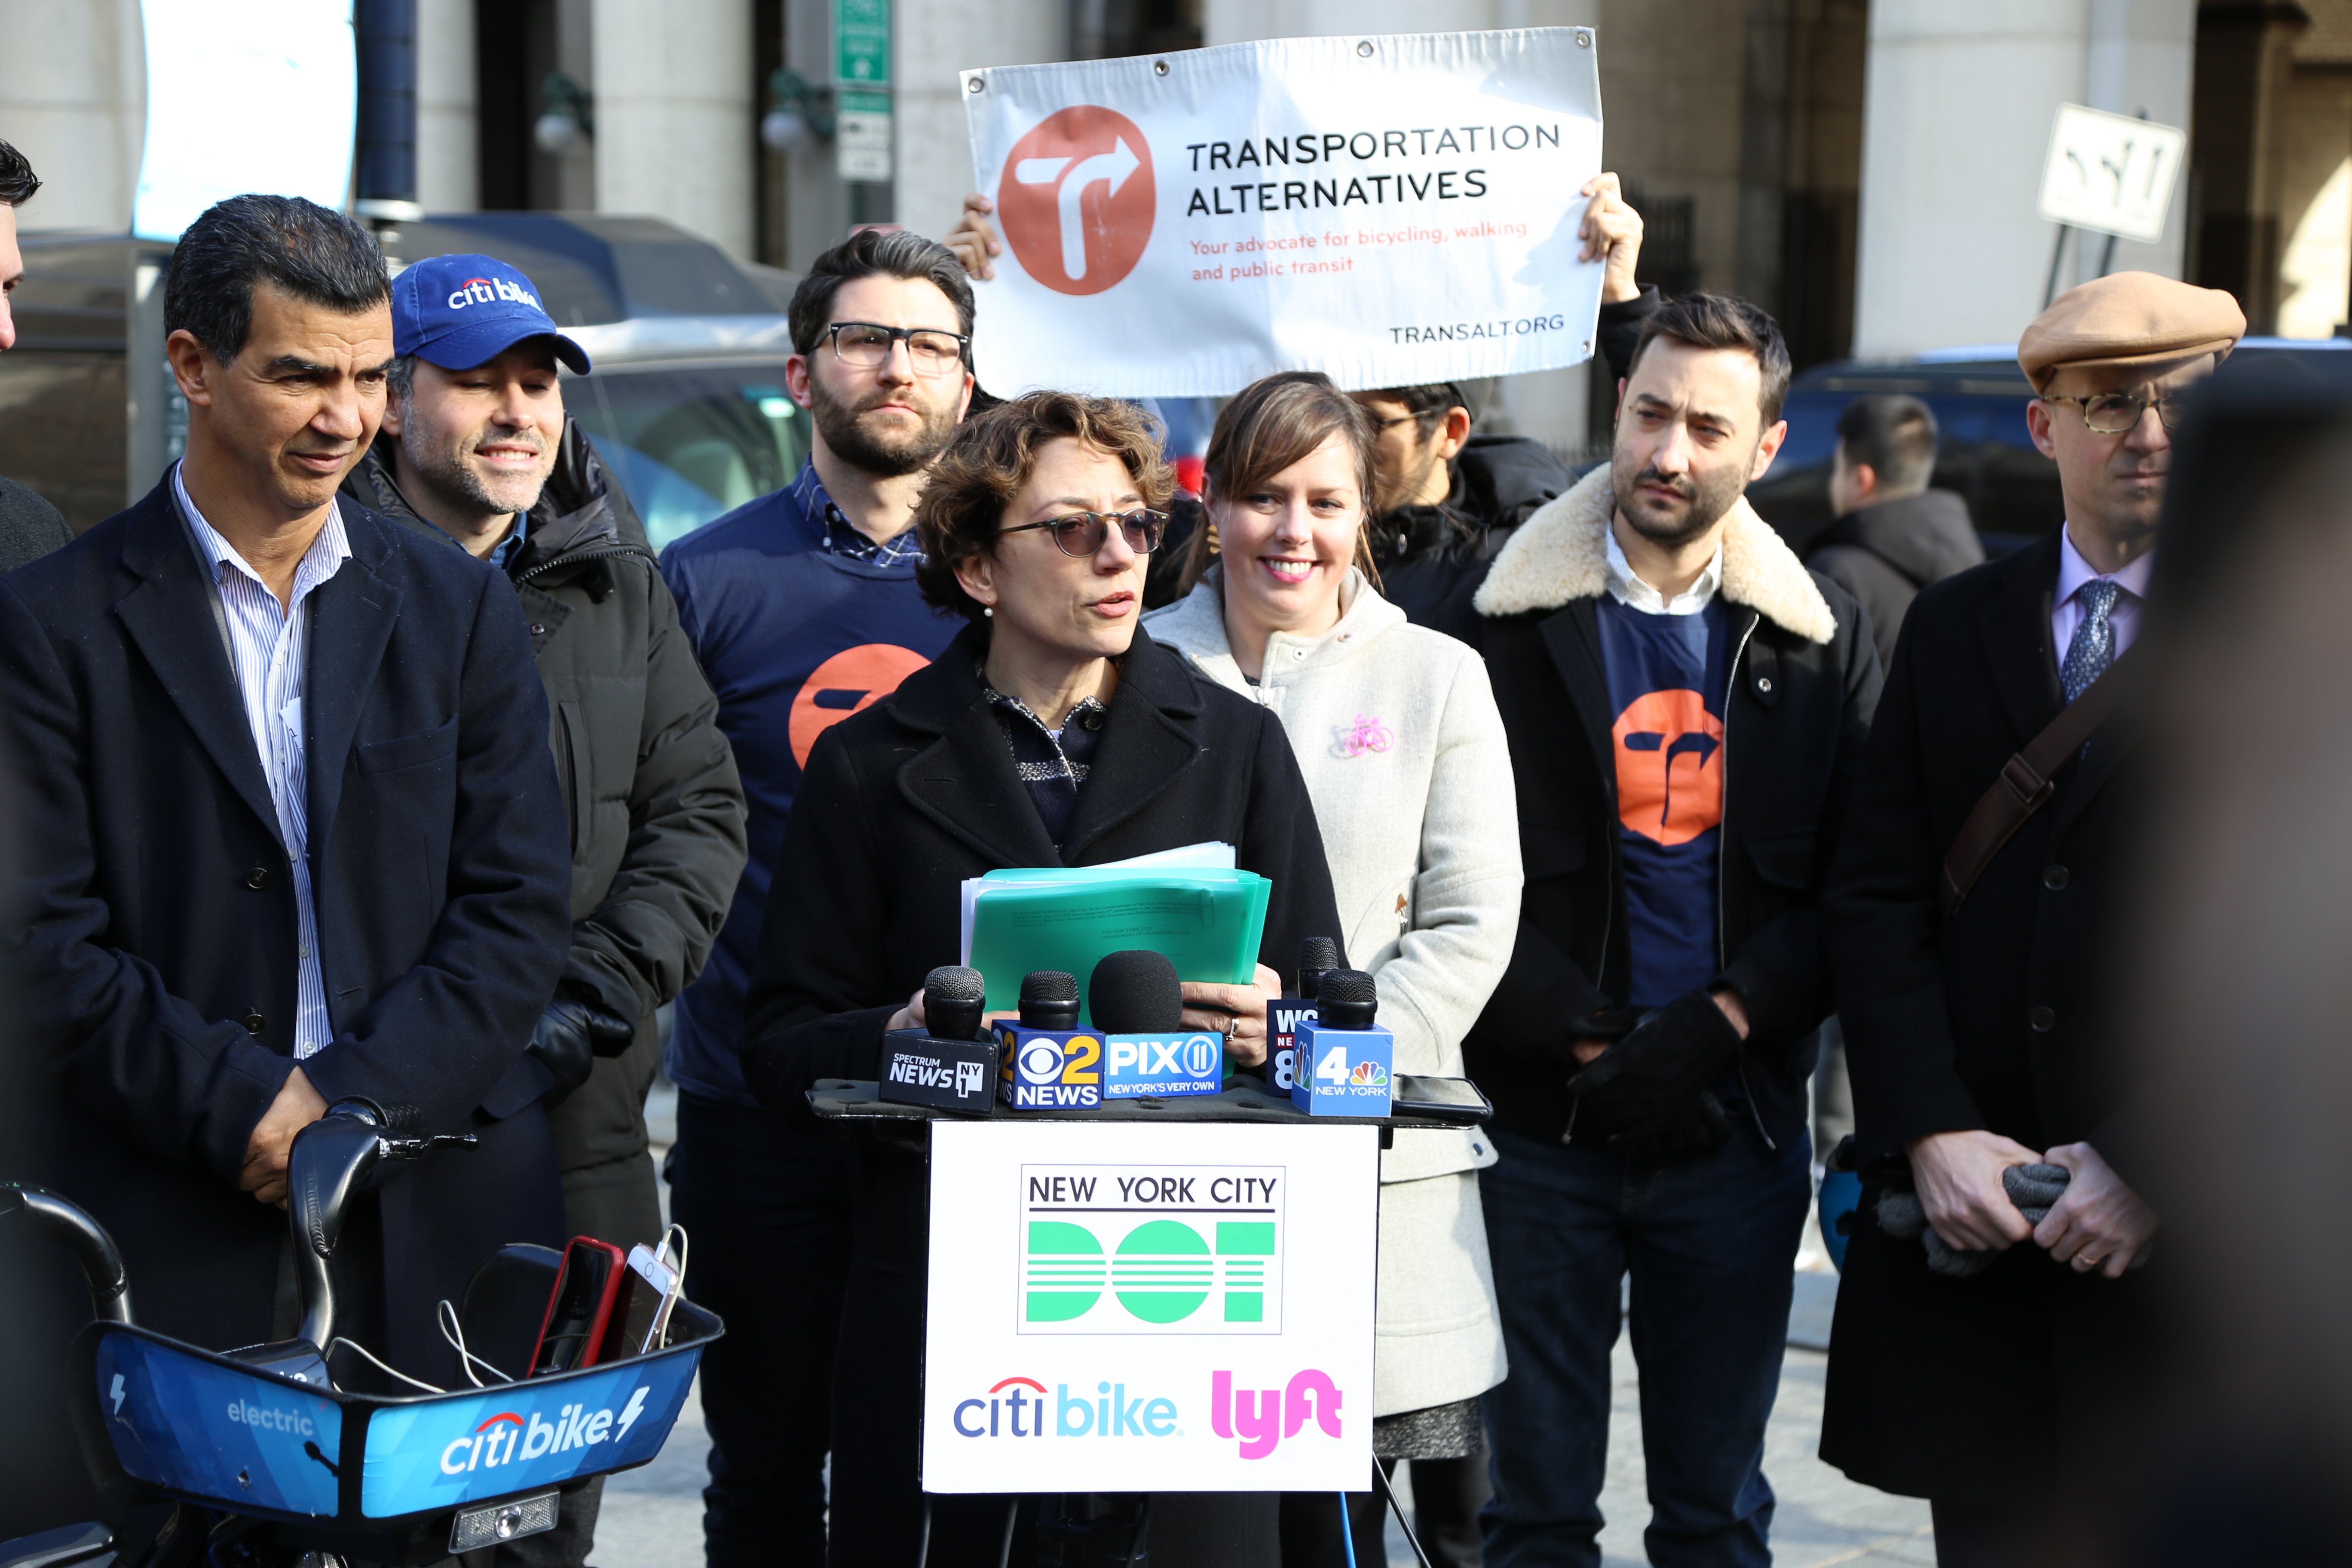 Polly Trottenberg at speaking at the news of the Citi Bike expansion. Surrounding her are members of Lyft, Citi Bike and Transportation Alternatives.  